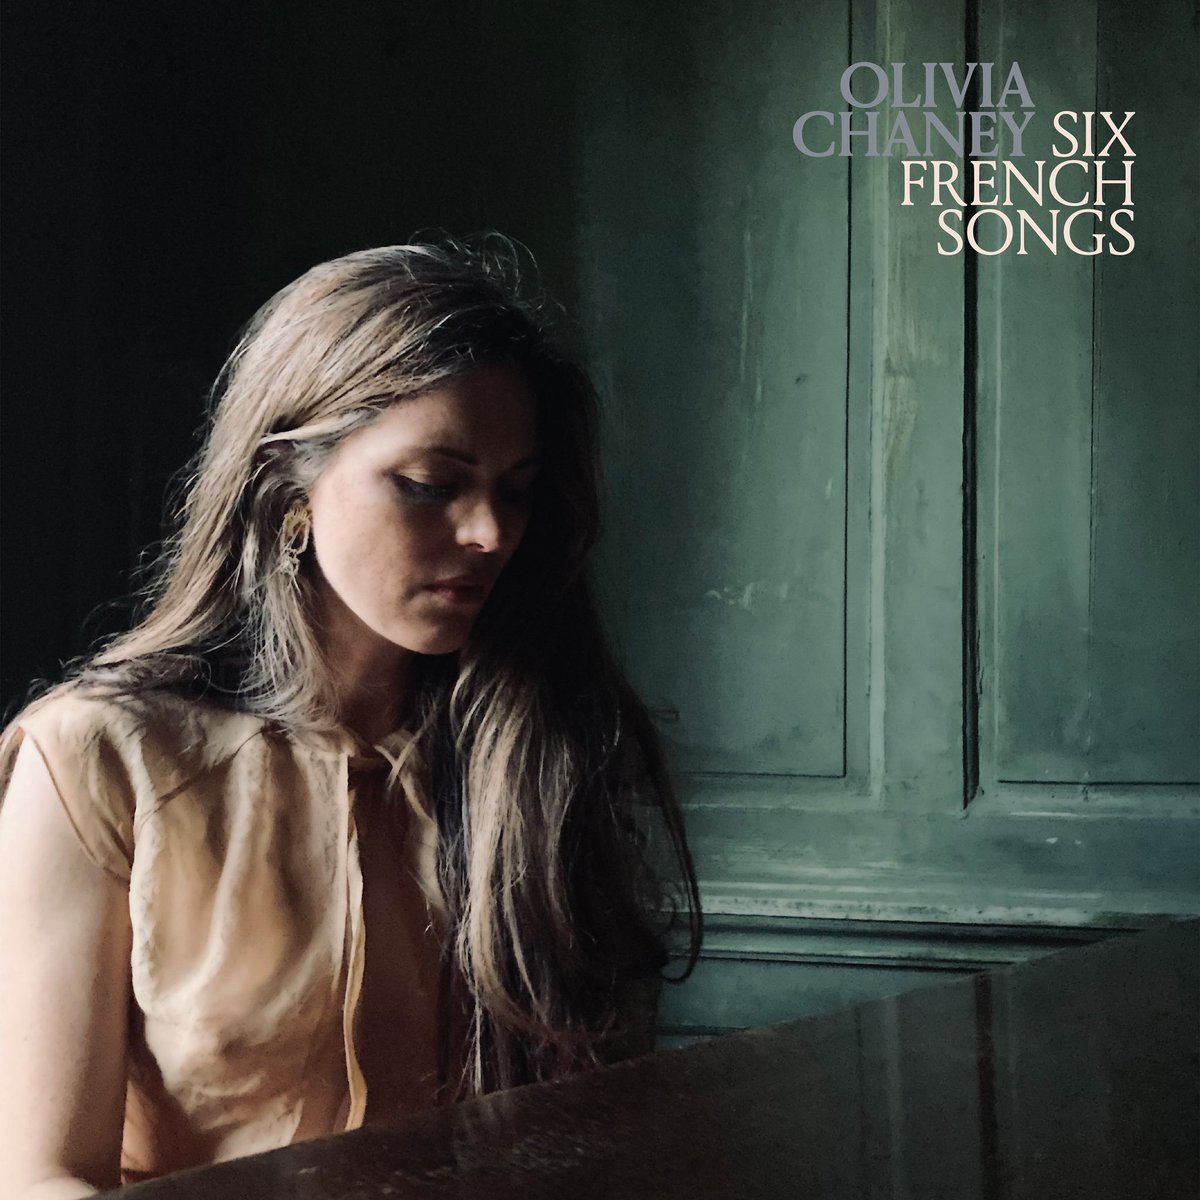 SIX FRENCH SONGS ~ out today🙌🏻💙🤍❤️🇫🇷!!! And there’s so much more new music coming soon - a full album of originals made with @tommydove too! Listen, download, order, stream, dream NOW - and let me know if you are enjoying #SixFrenchSongs ✨💋! oliviachaney.ffm.to/sixfrenchsongs